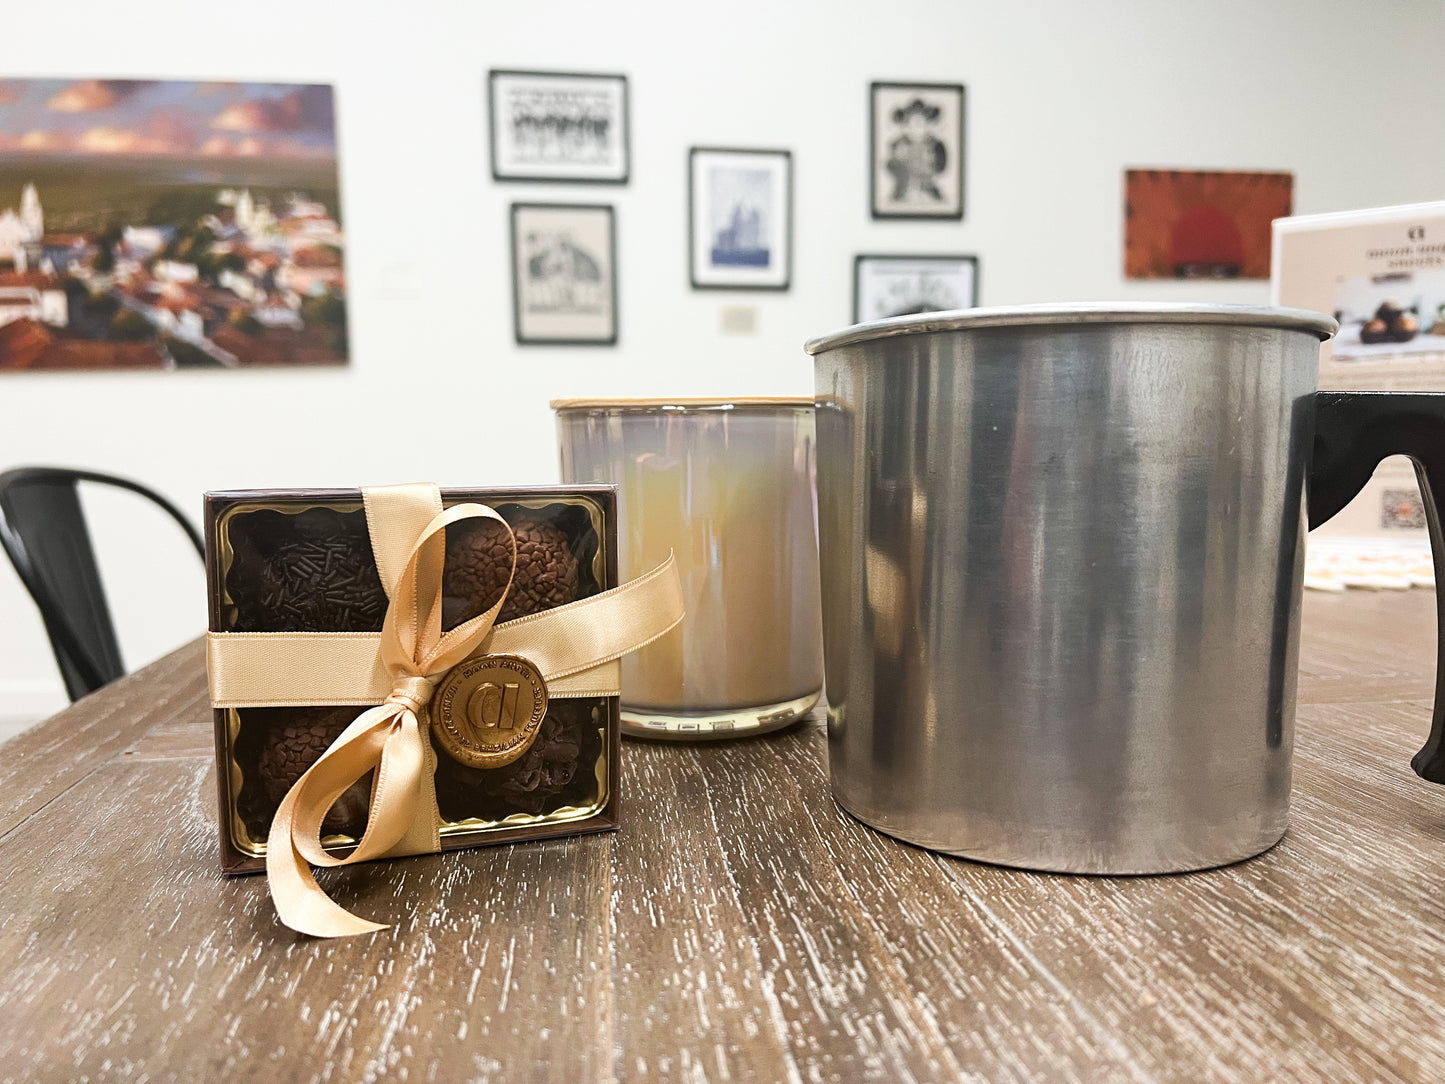 Candles & Chocolates: A Cultural Luxury Candle Making Experience